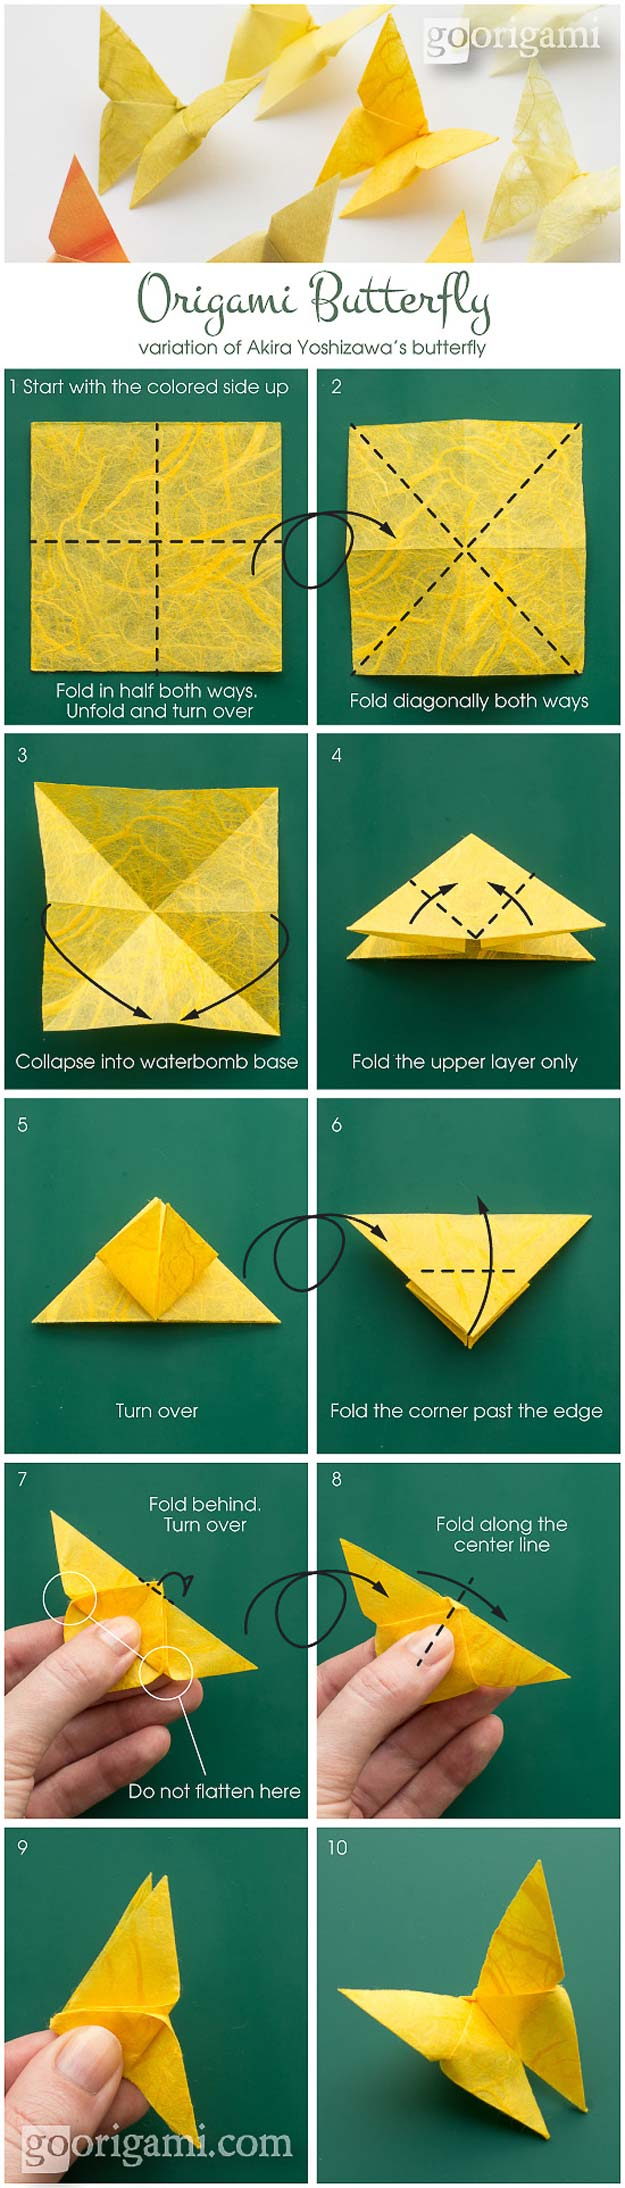 Origami Lantern Ball Instructions 40 Best Diy Origami Projects To Keep Your Entertained Today